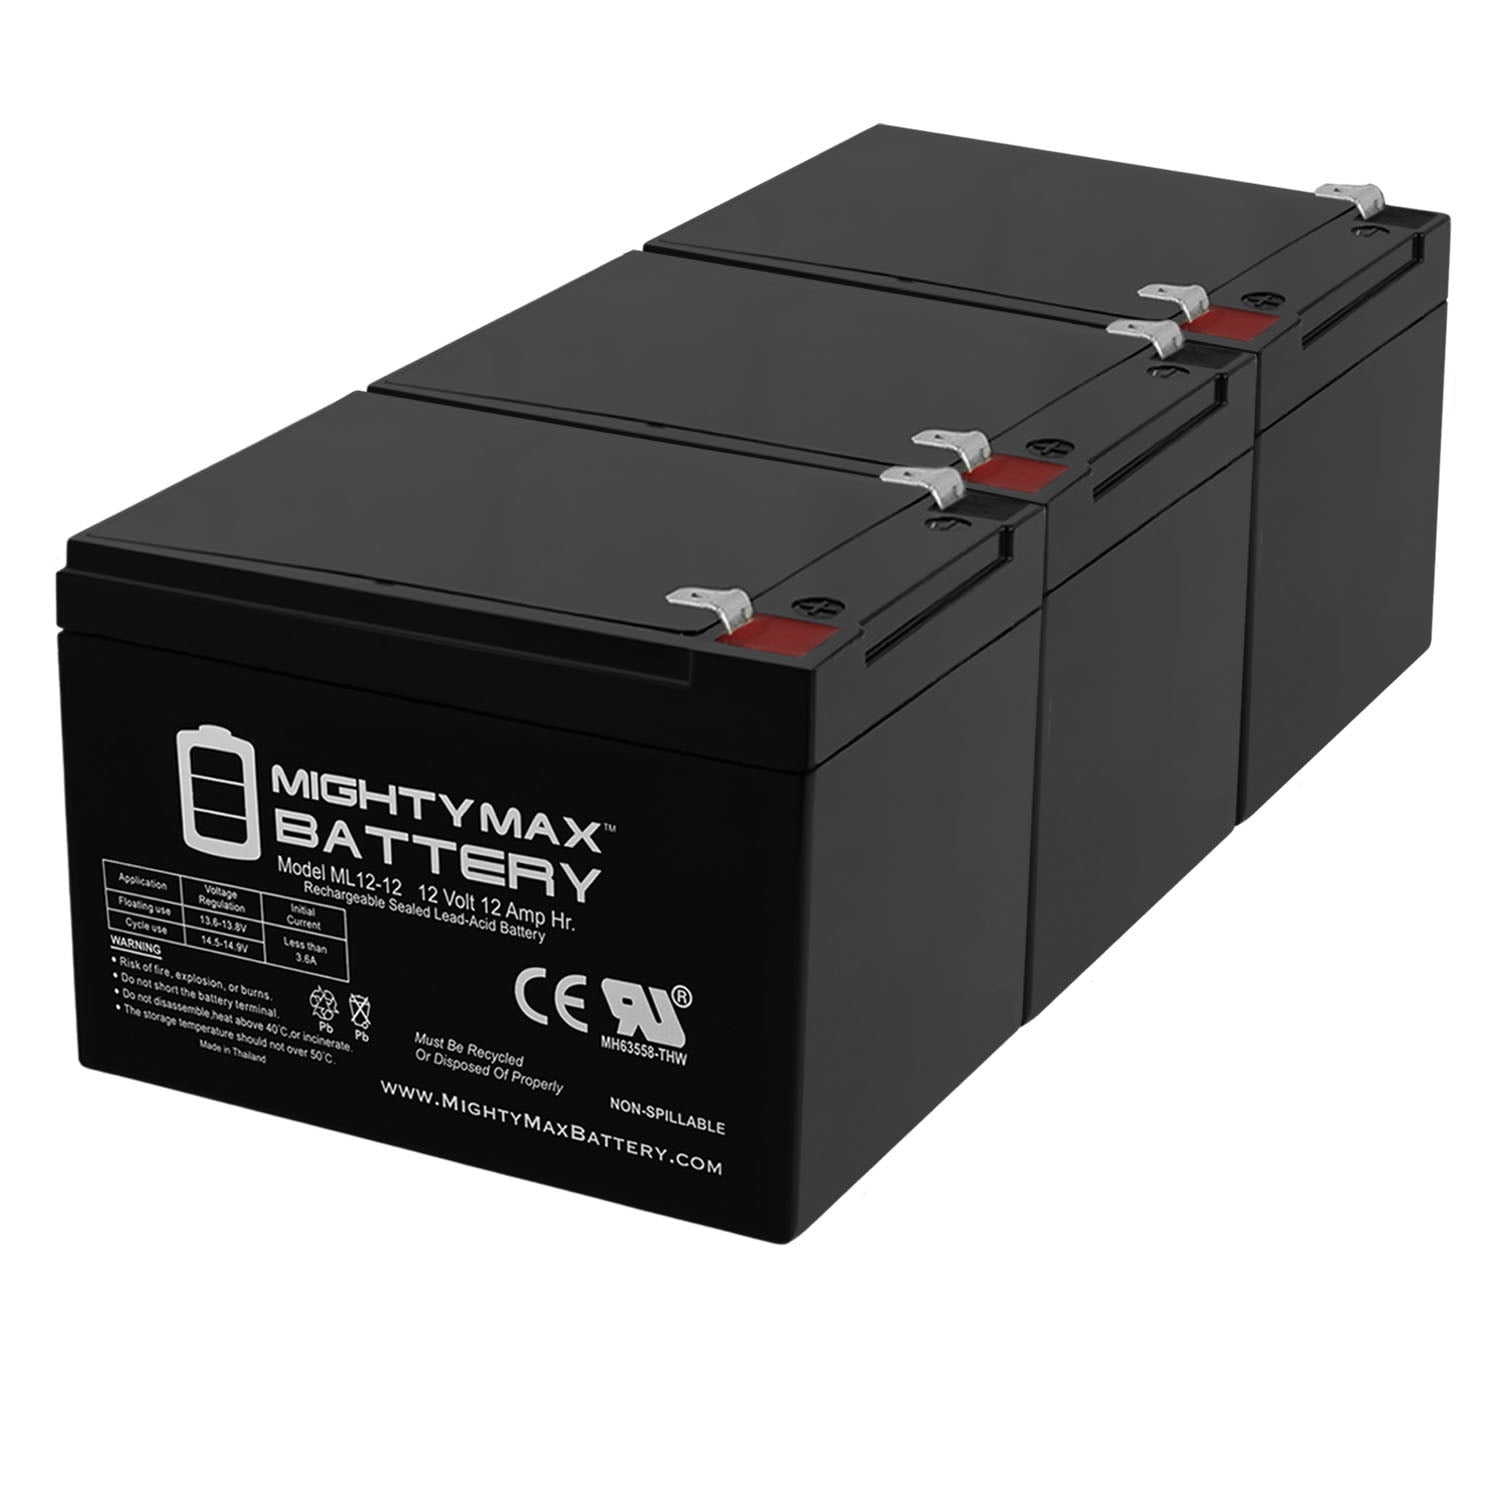 Mighty Max Battery 12V 12AH F2 Invacare Zoom-3 SLA Sealed Lead Acid Battery 10 Pack Brand Product 